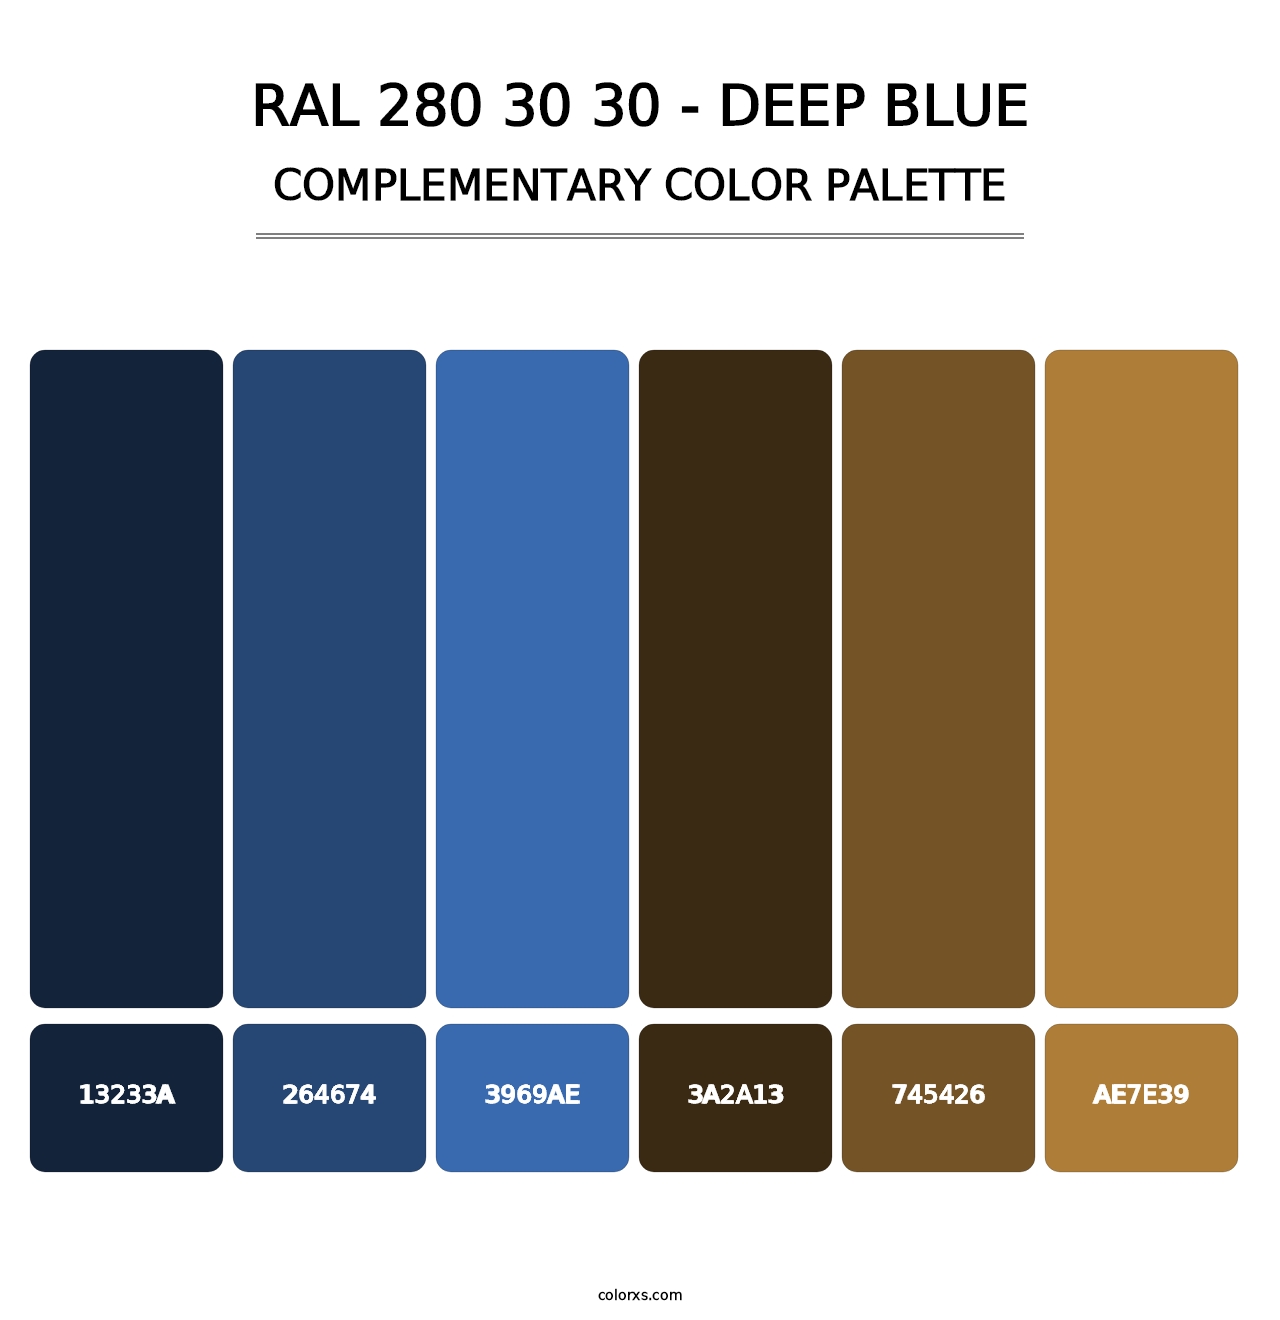 RAL 280 30 30 - Deep Blue - Complementary Color Palette